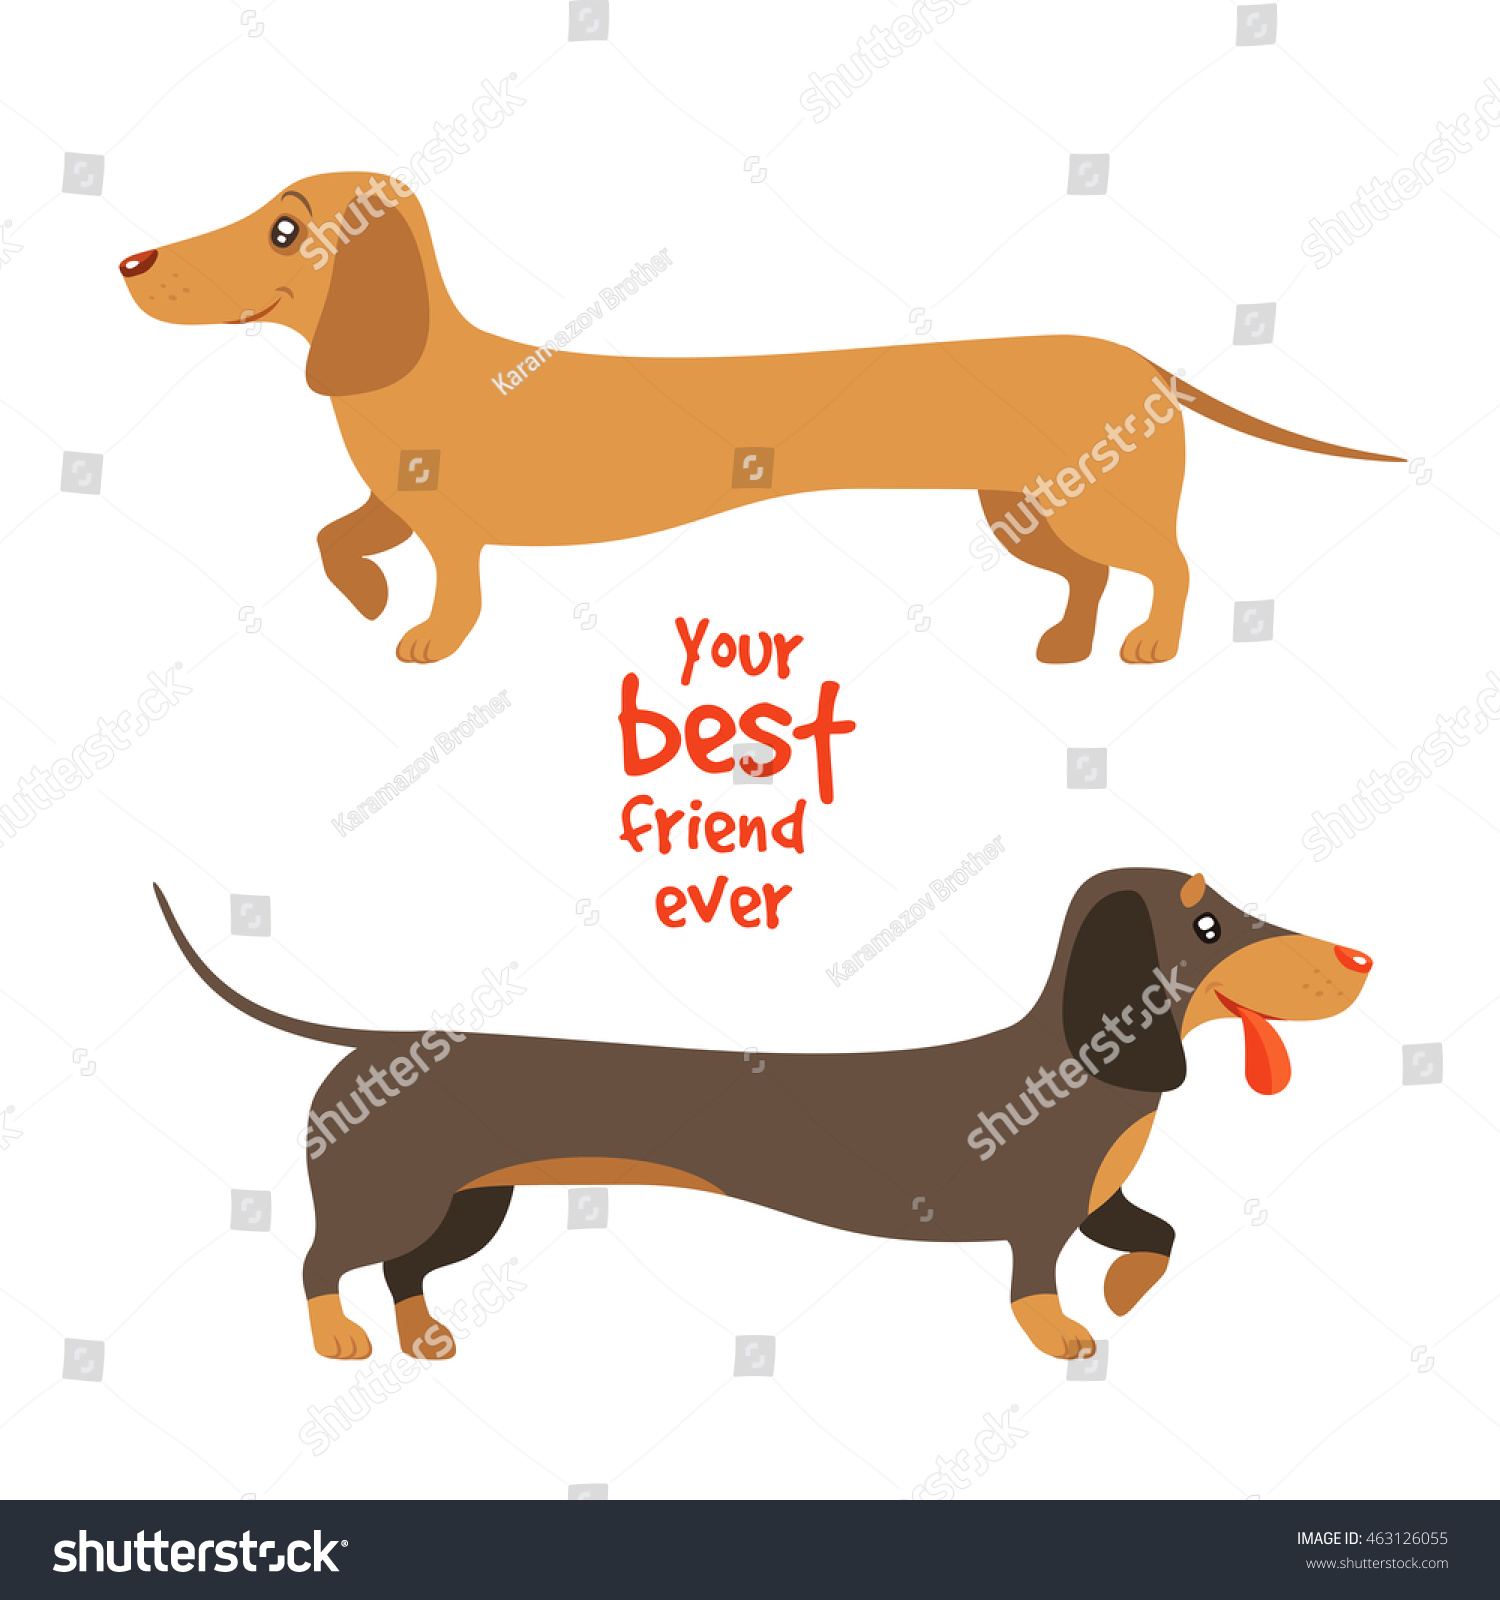 SVG of Your best friend ever. Vector flat illustration of two dachshunds, ginger and brown, on white background svg